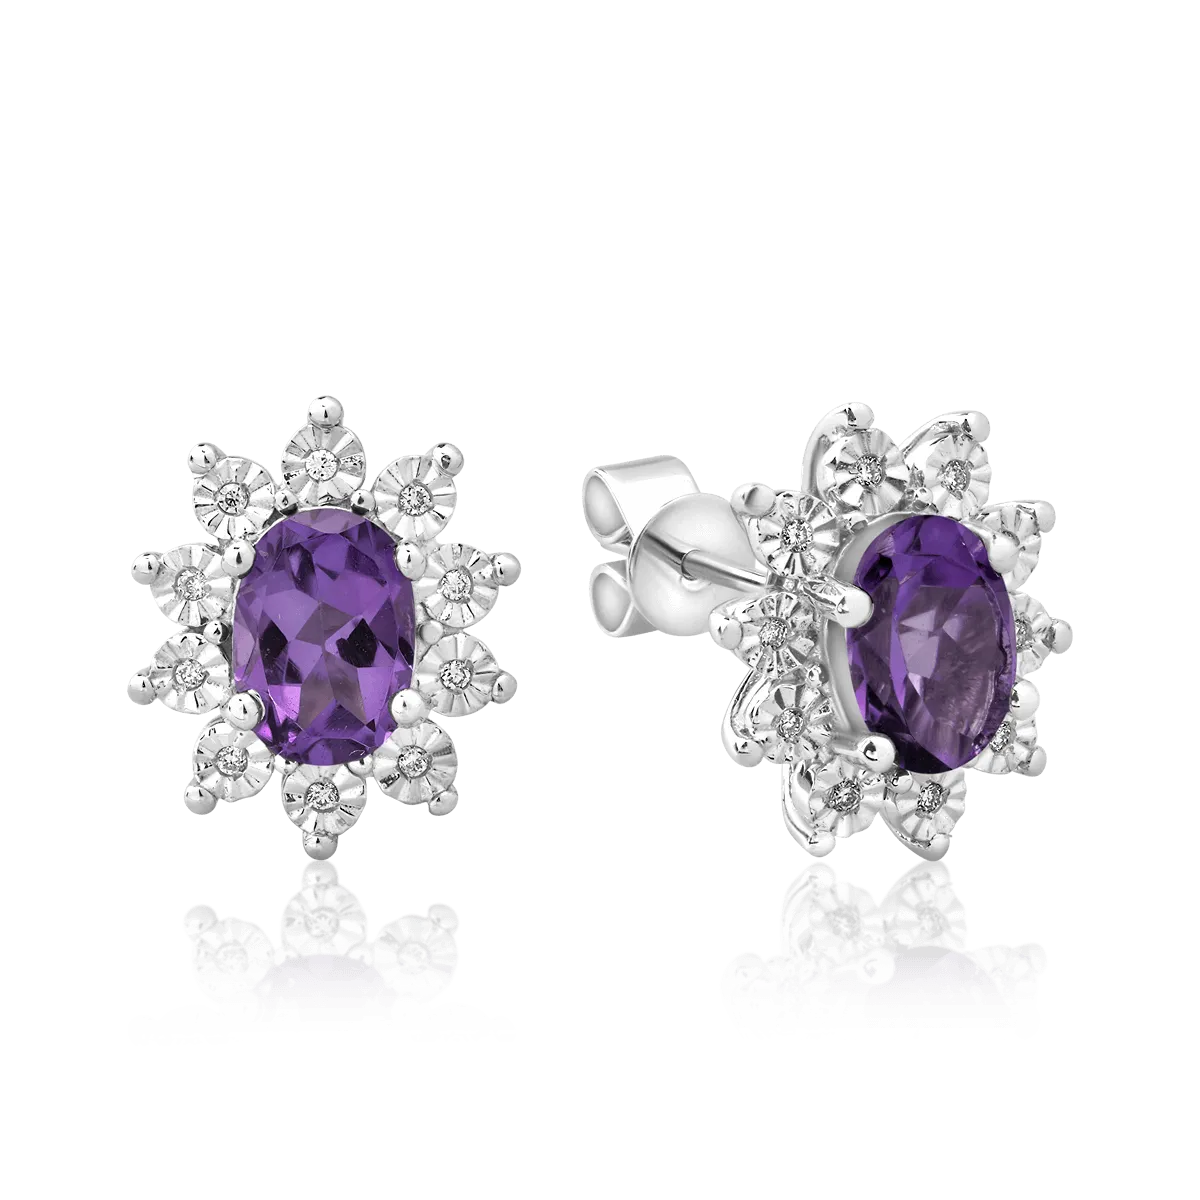 14K white gold earrings with 1.44ct amethysts and 0.05ct diamonds